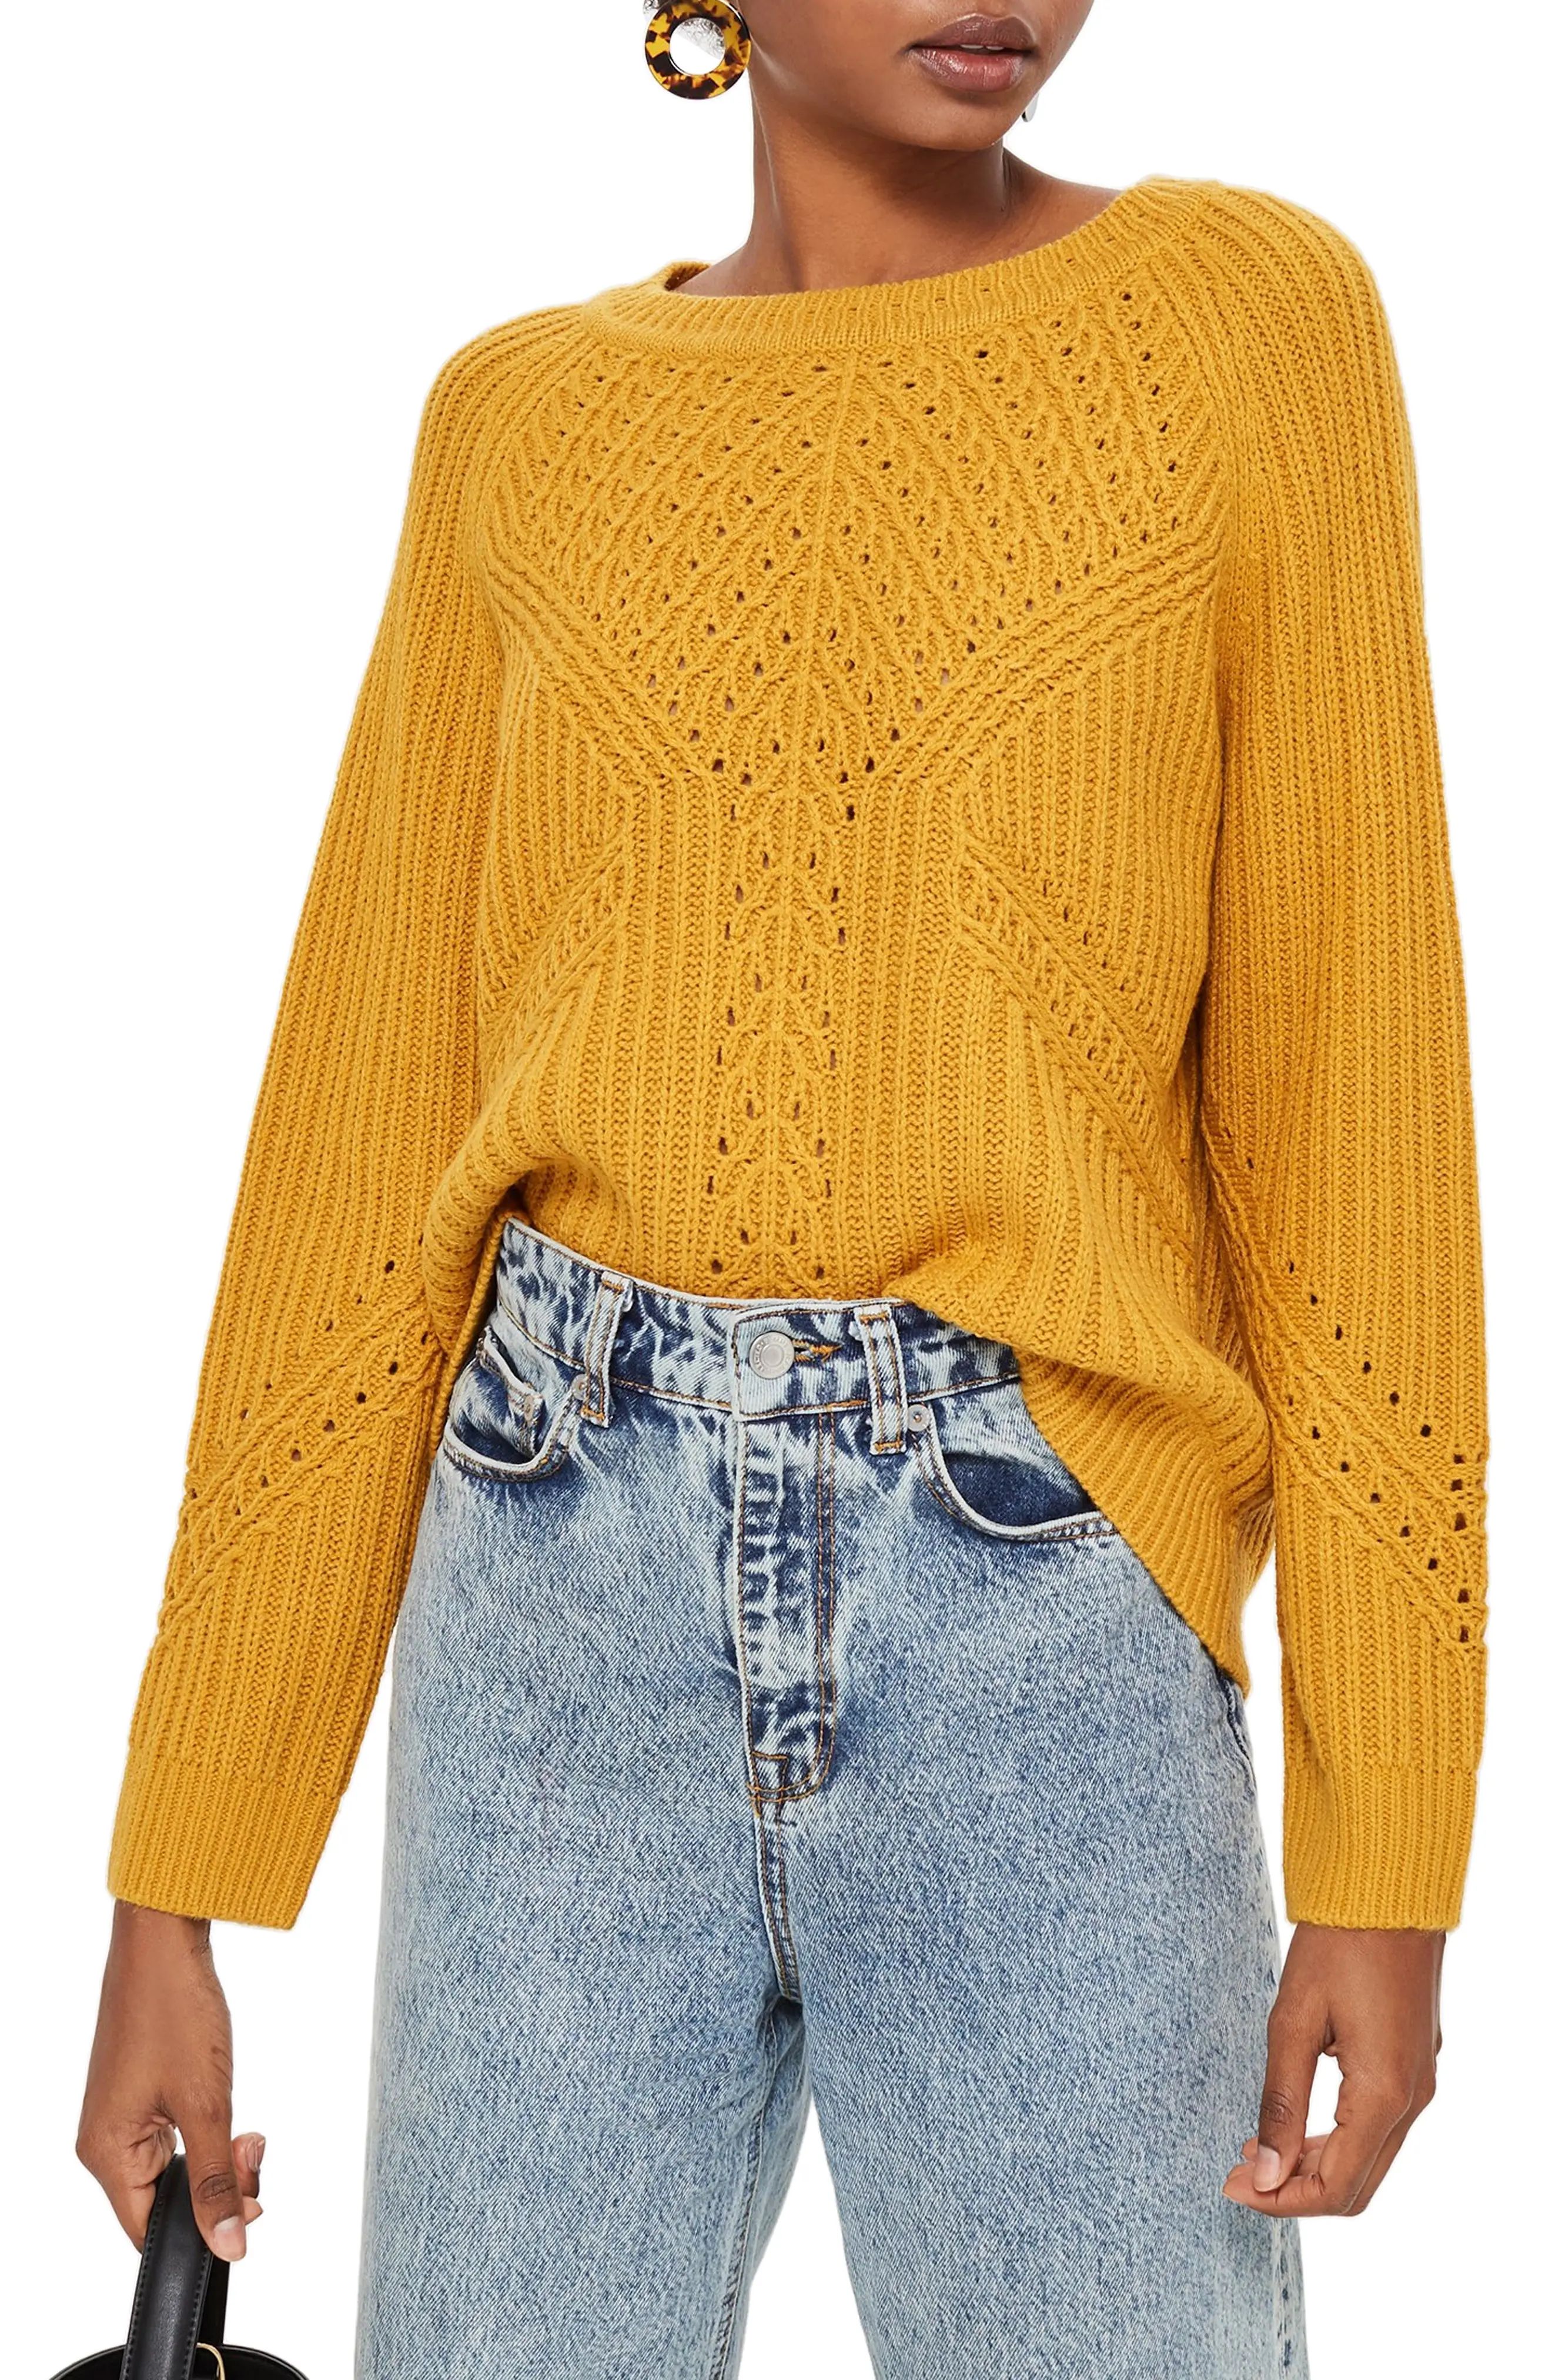 Women's Topshop Rib & Pointelle Stitch Sweater, Size 6 US (fits like 2-4) - Yellow | Nordstrom